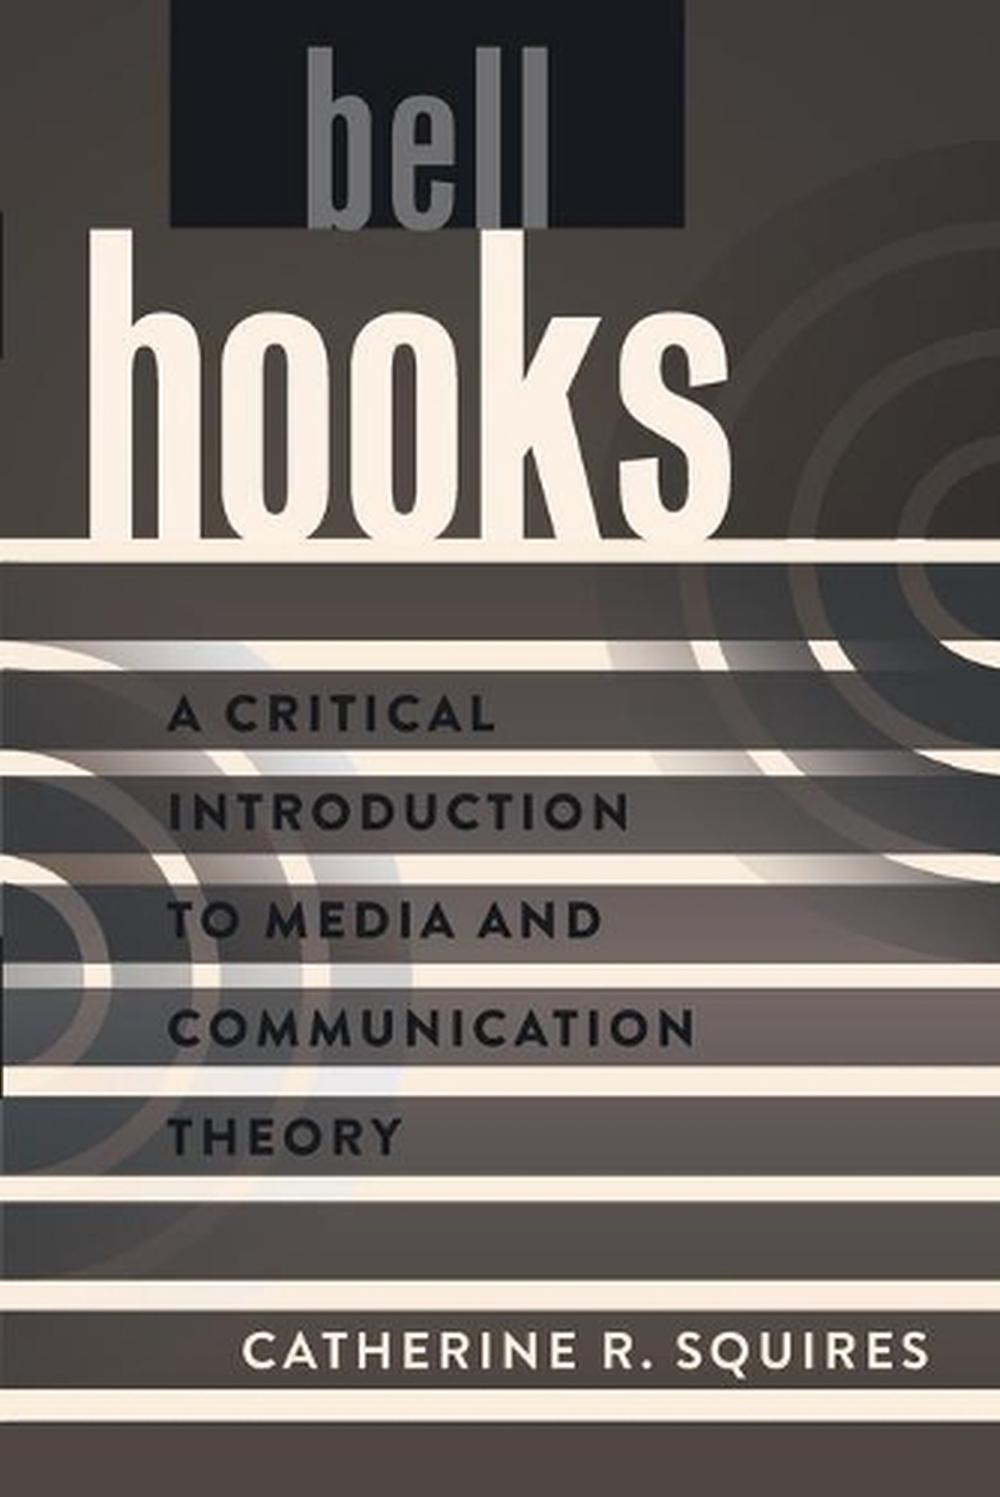 bell hooks critical thinking book